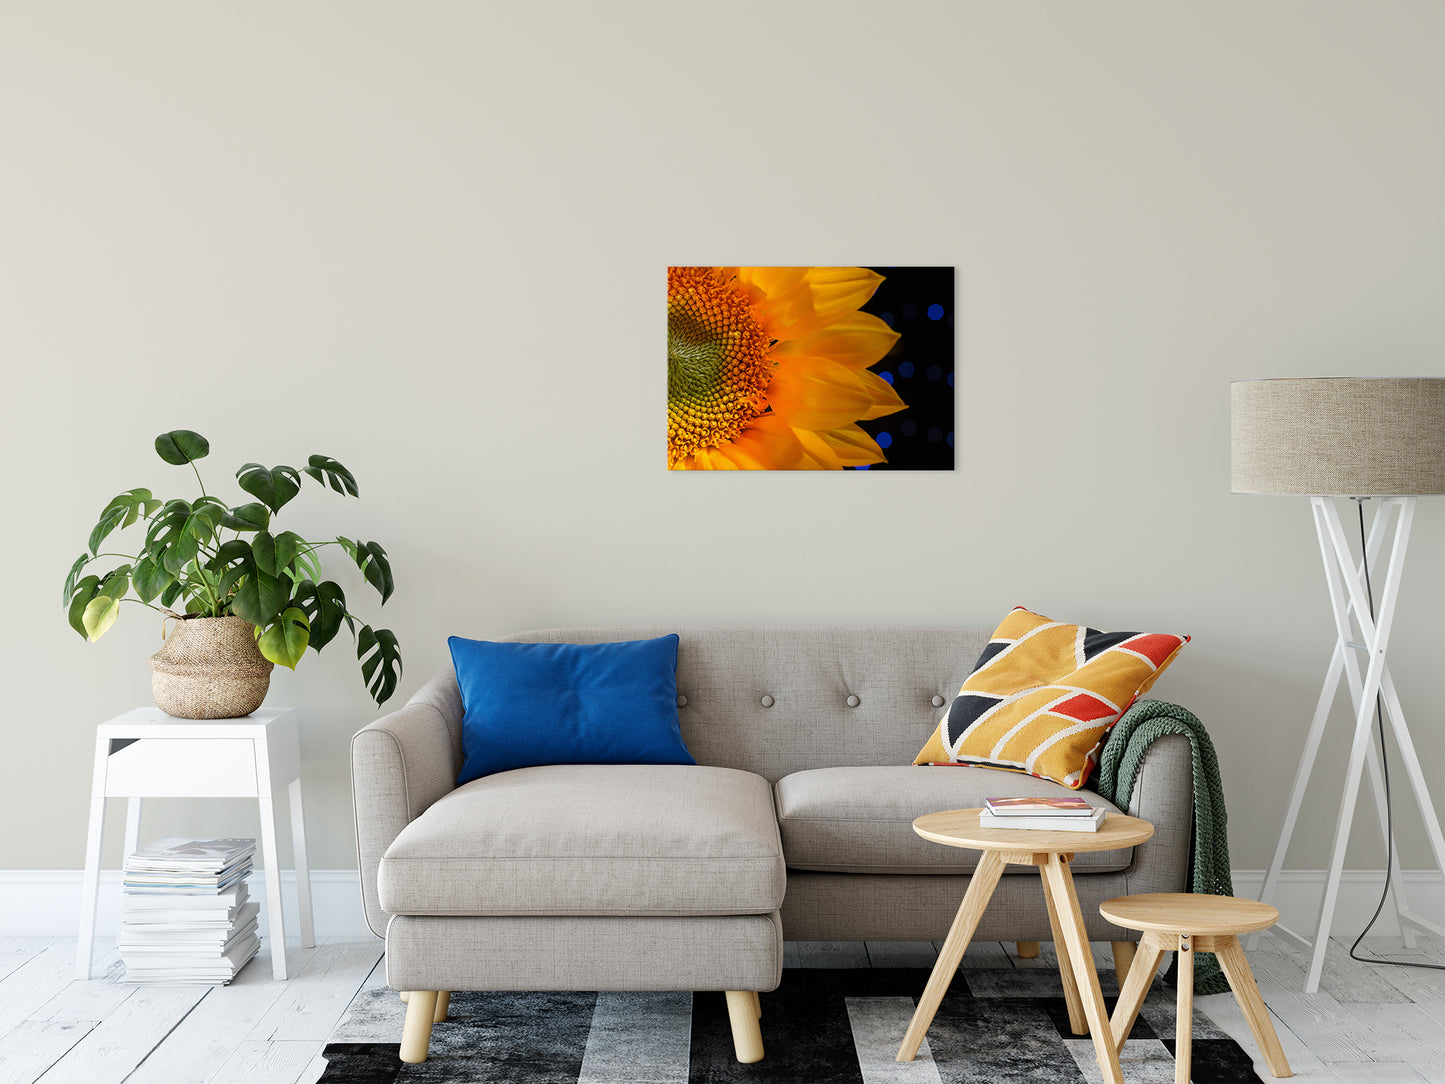 Close-up Sunflower Nature / Floral Photo Fine Art Canvas Wall Art Prints 20" x 30" - PIPAFINEART